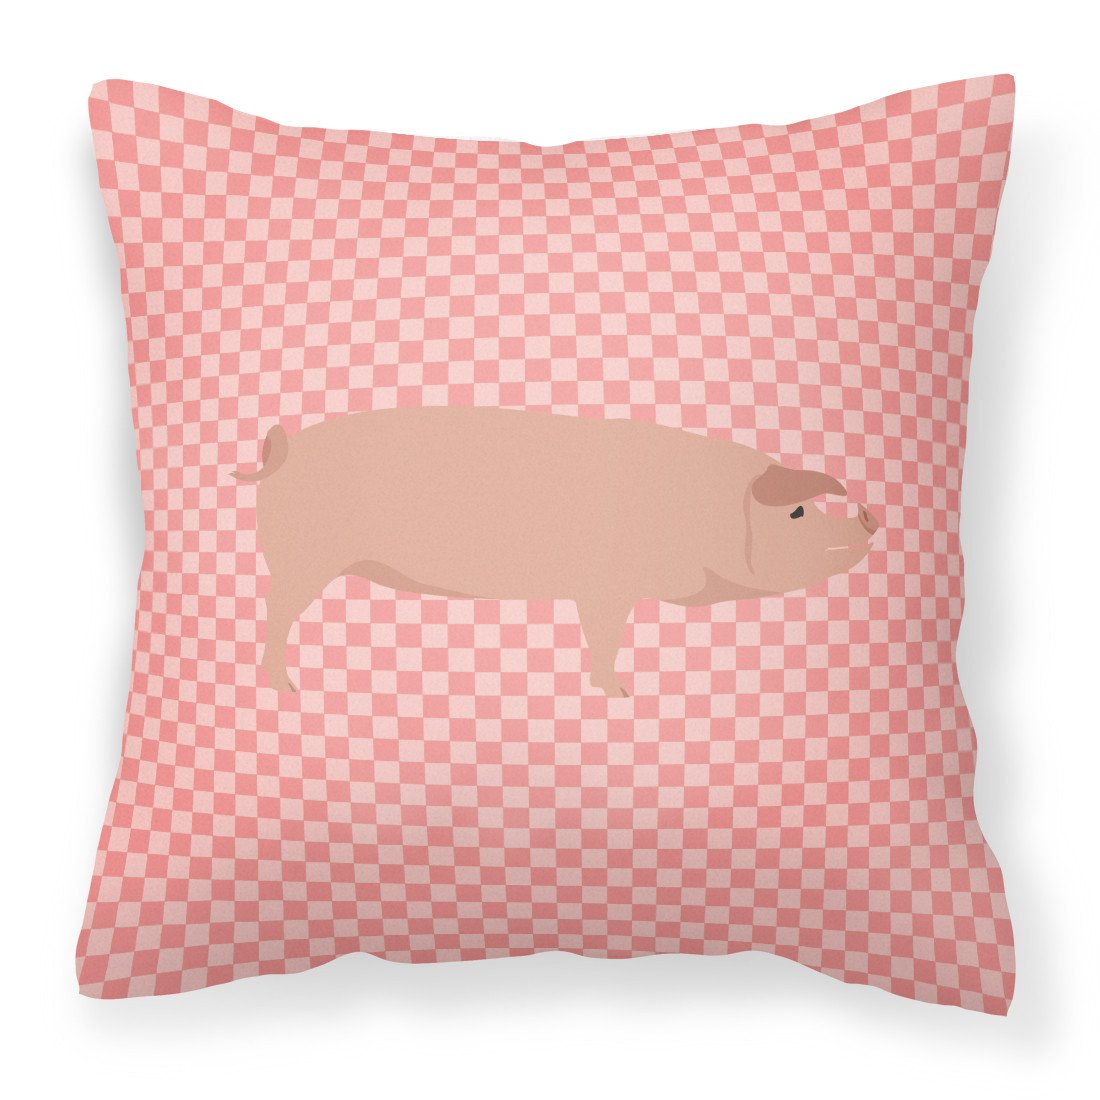 American Landrace Pig Pink Check Fabric Decorative Pillow BB7932PW1818 by Caroline's Treasures